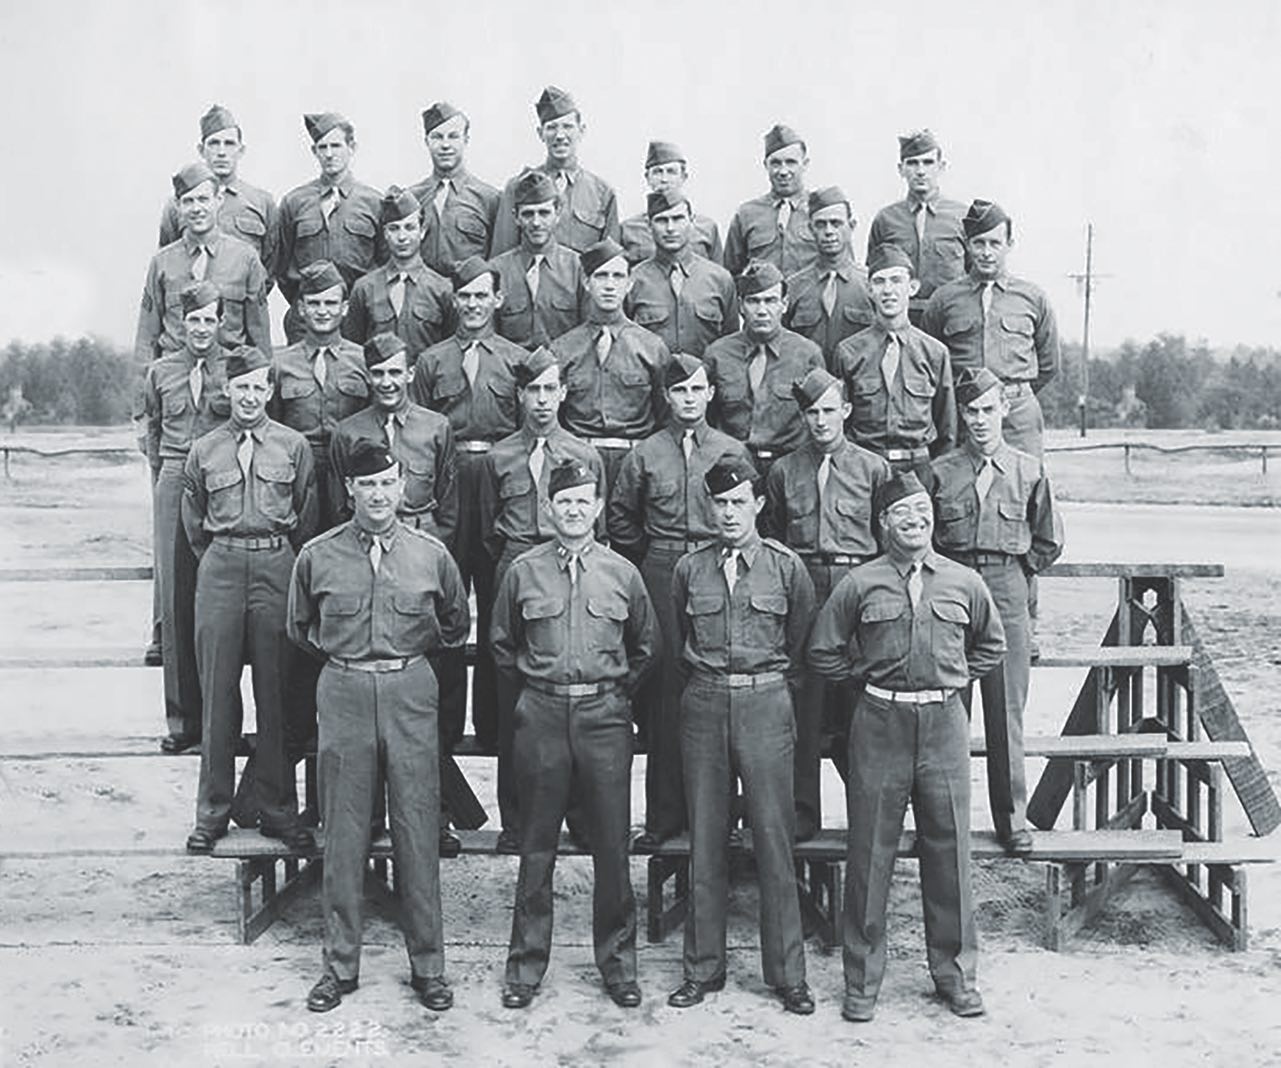 Members of the 130th Chemical Processing Company trained at Camp Sibert, Ala. / Alabama Department of Archives and History